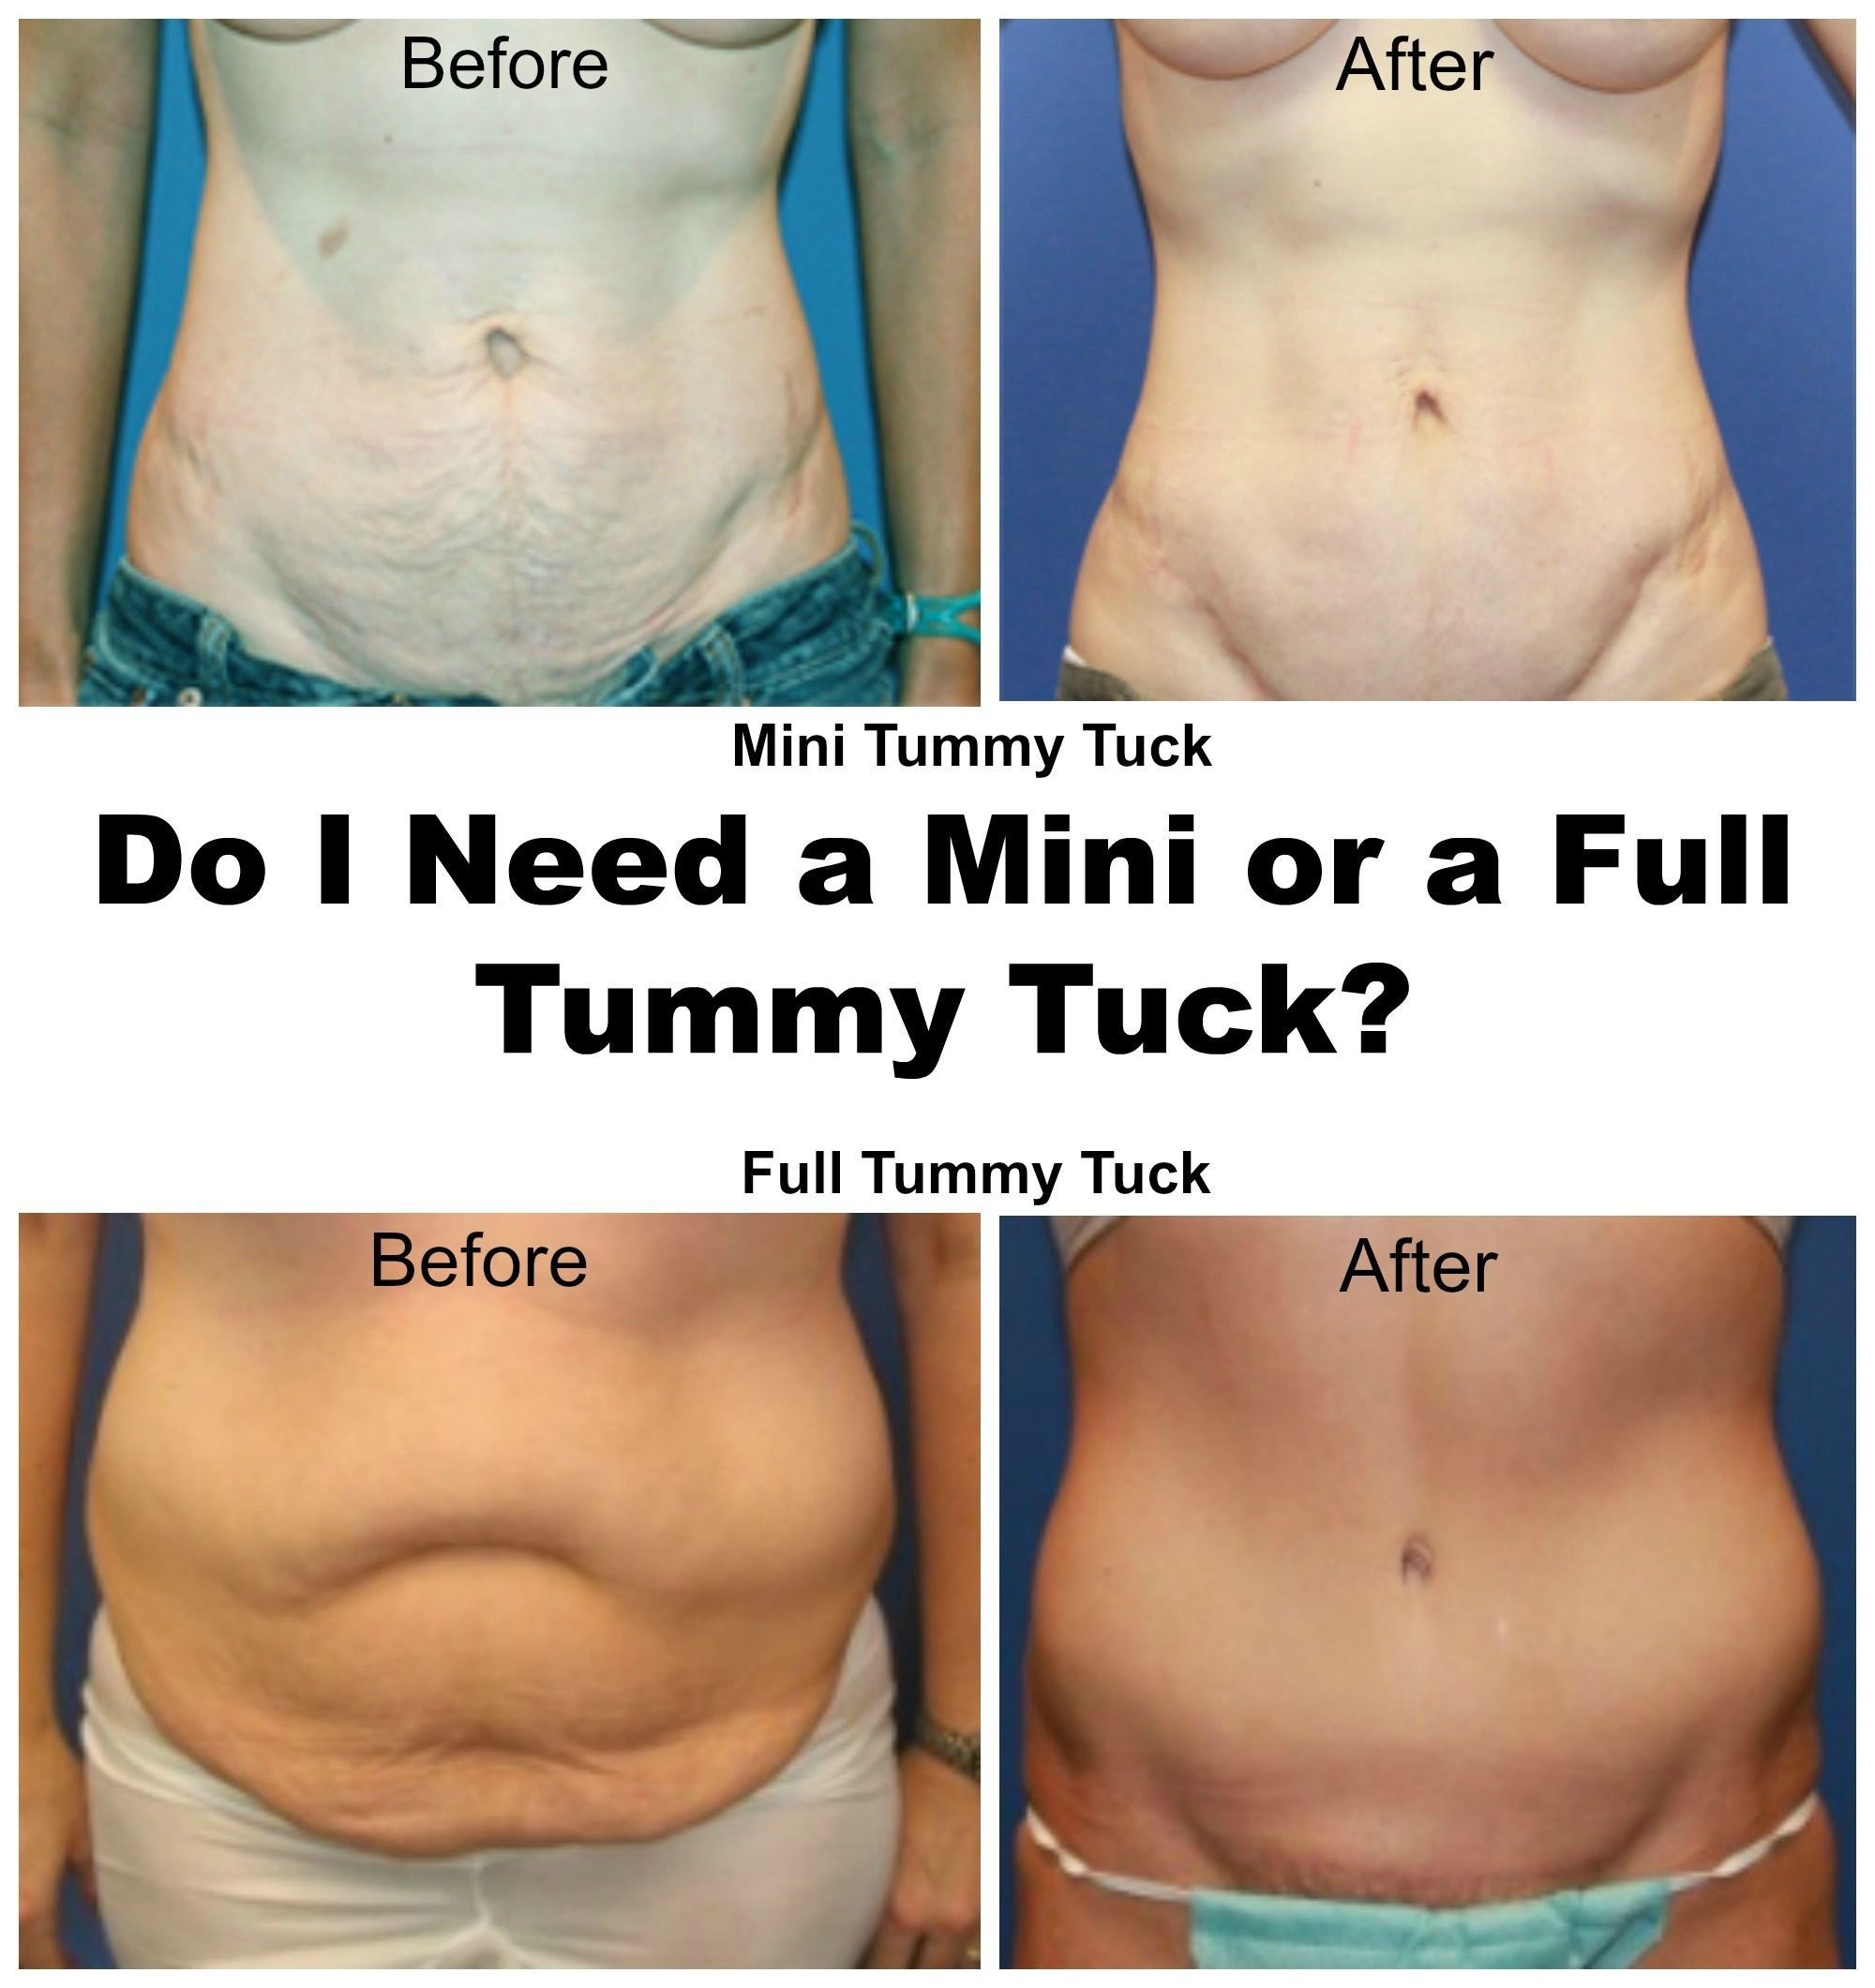 Tummy Tuck Cost in Bangalore - Compare Prices, Reviews, Best Doctors & ...